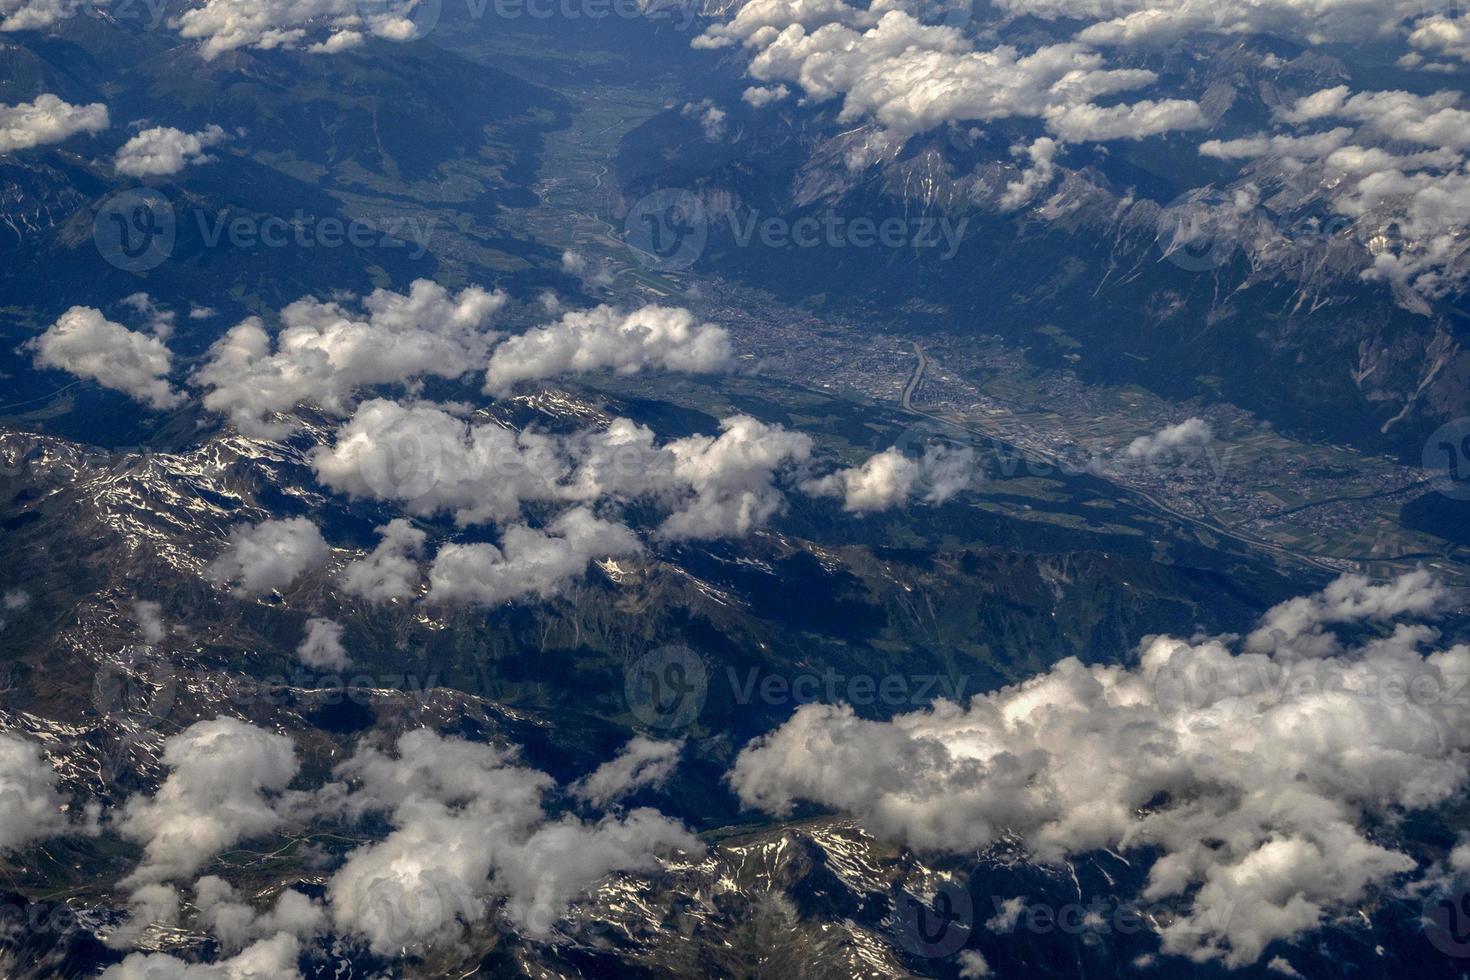 Innsbruck valle aereo panorama a partire dal aereo foto